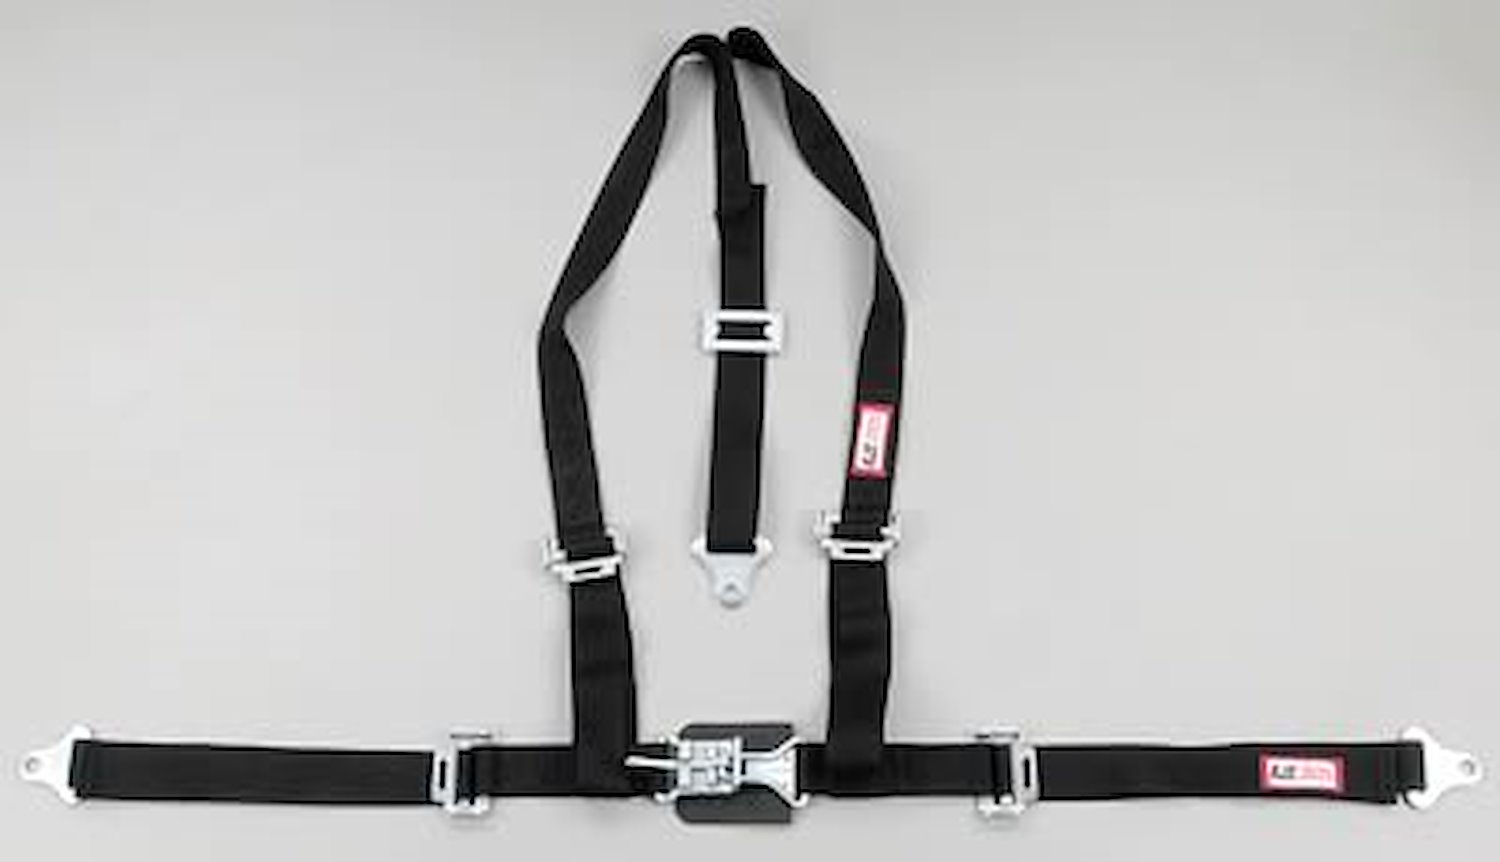 NON-SFI L&L HARNESS 3 PULL DOWN Lap Belt w/adjuster 2 S.H. V ROLL BAR Mount ALL SNAP ENDS BLUE